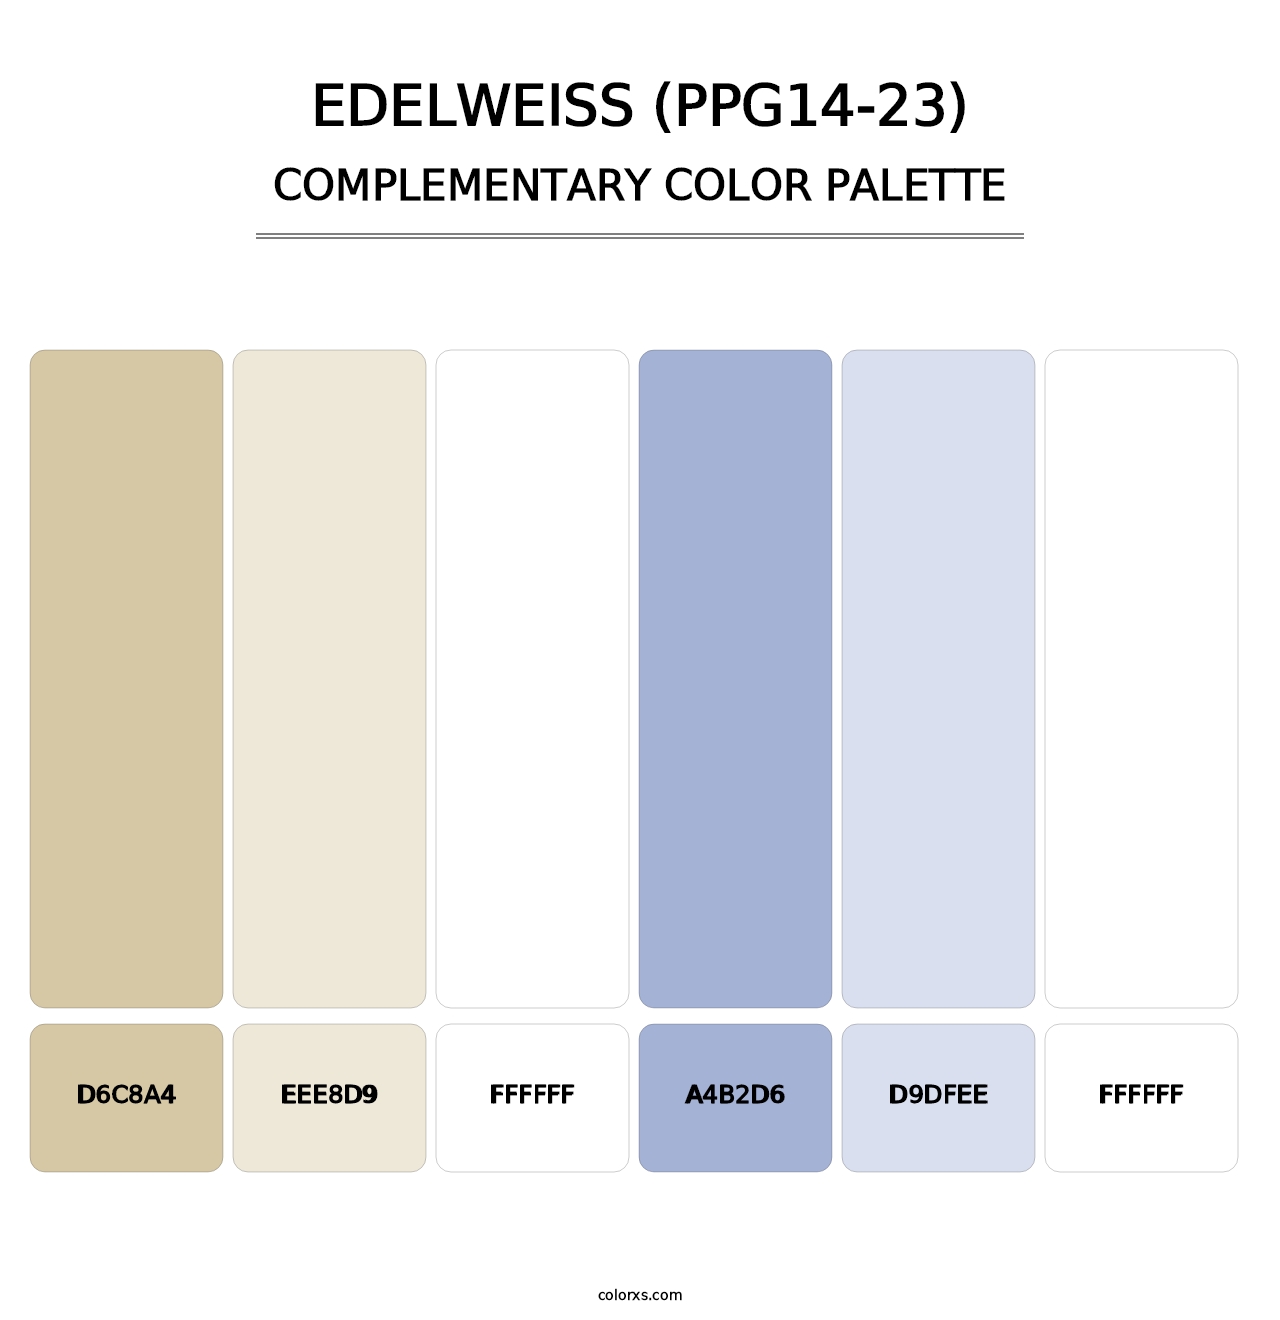 Edelweiss (PPG14-23) - Complementary Color Palette